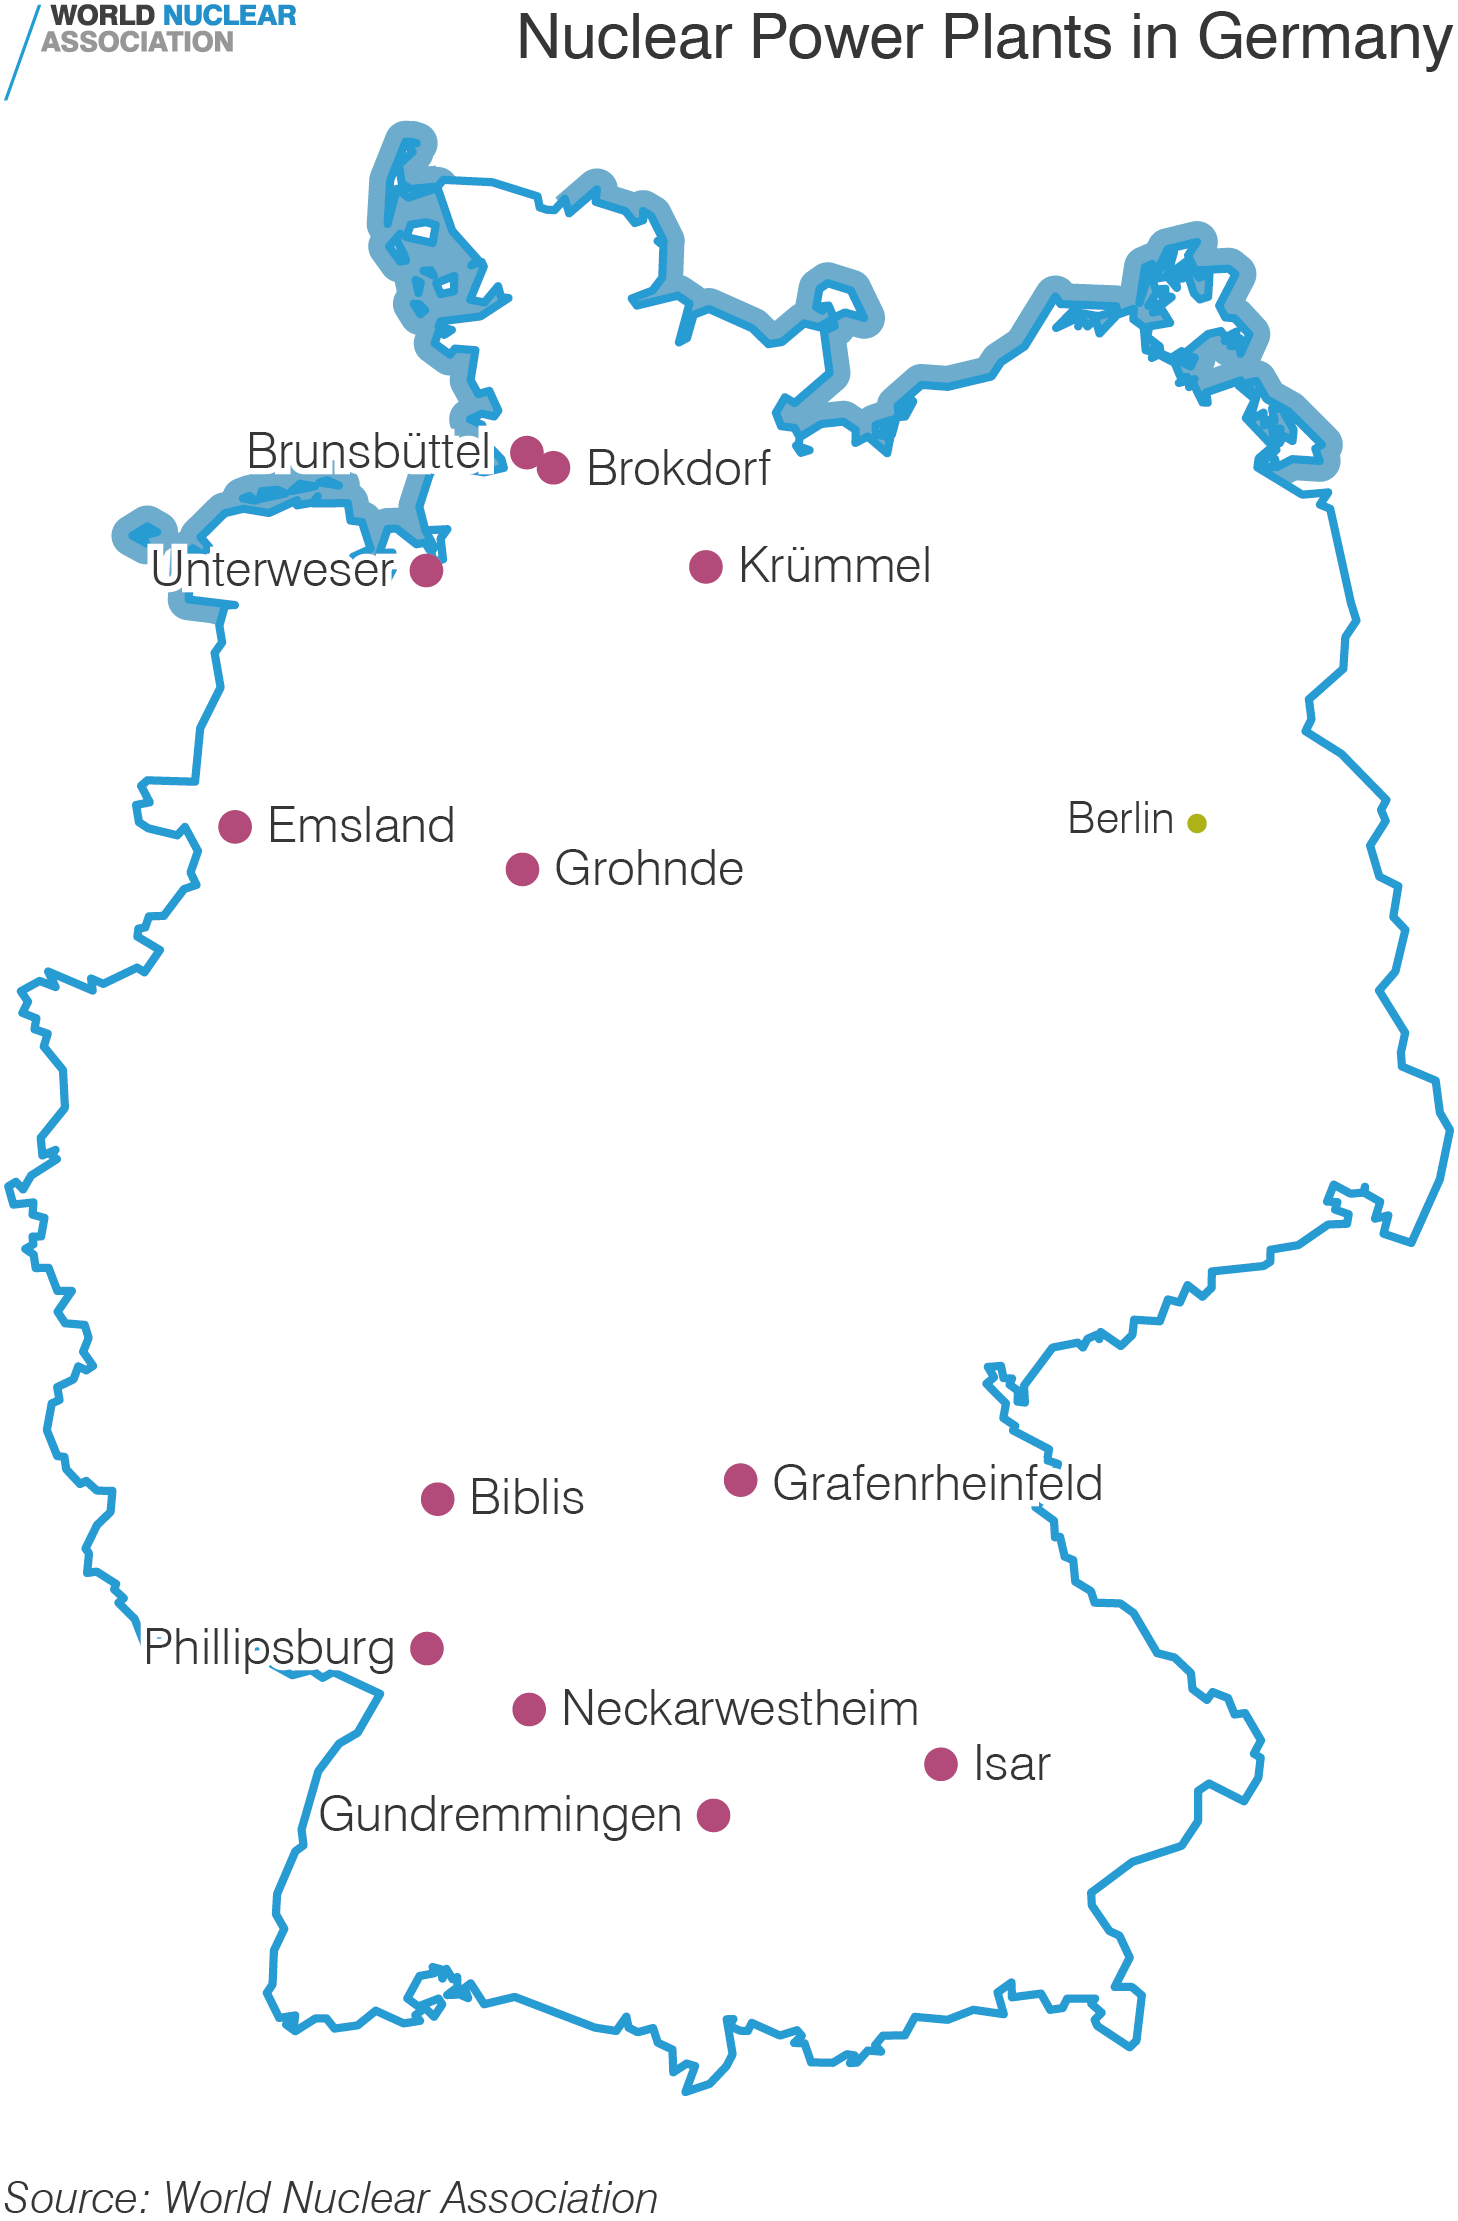 Nuclear Power Plants in Germany